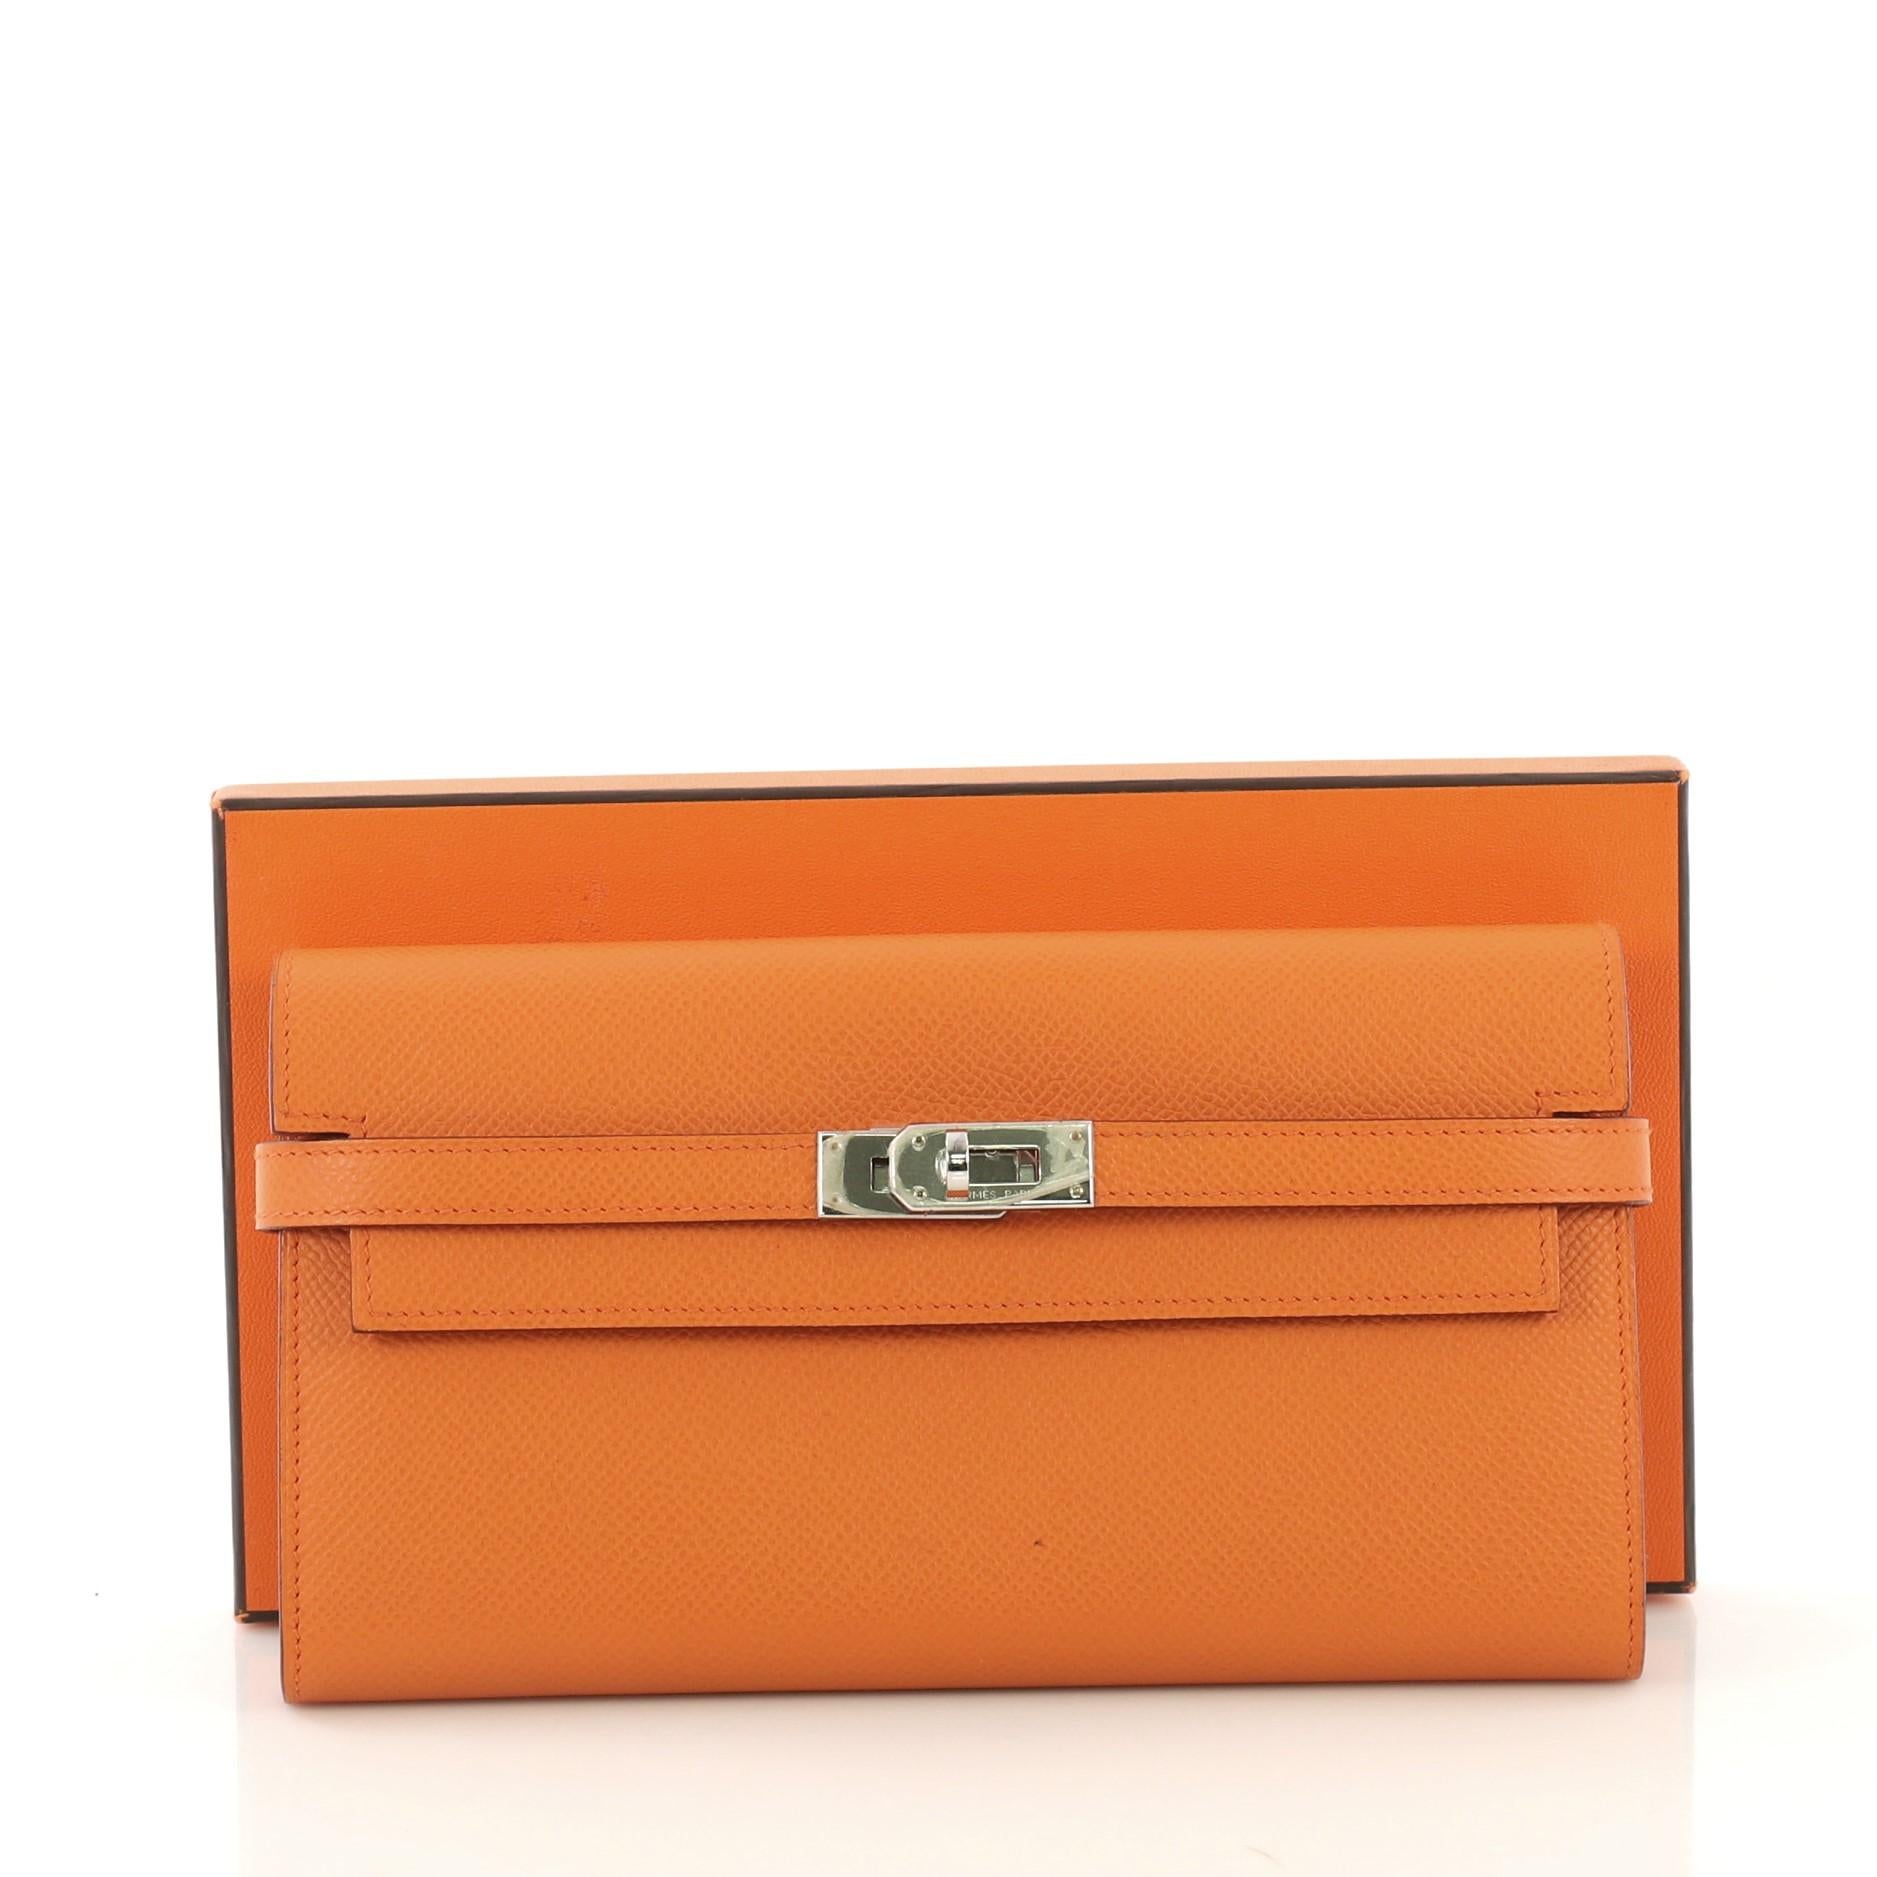 This Hermes Kelly Wallet Epsom Long, crafted in Orange H orange epsom leather, features palladium hardware. Its turn-lock closure opens to an Orange H orange epsom leather interior with middle zip compartment, slip pocket and multiple card slots.